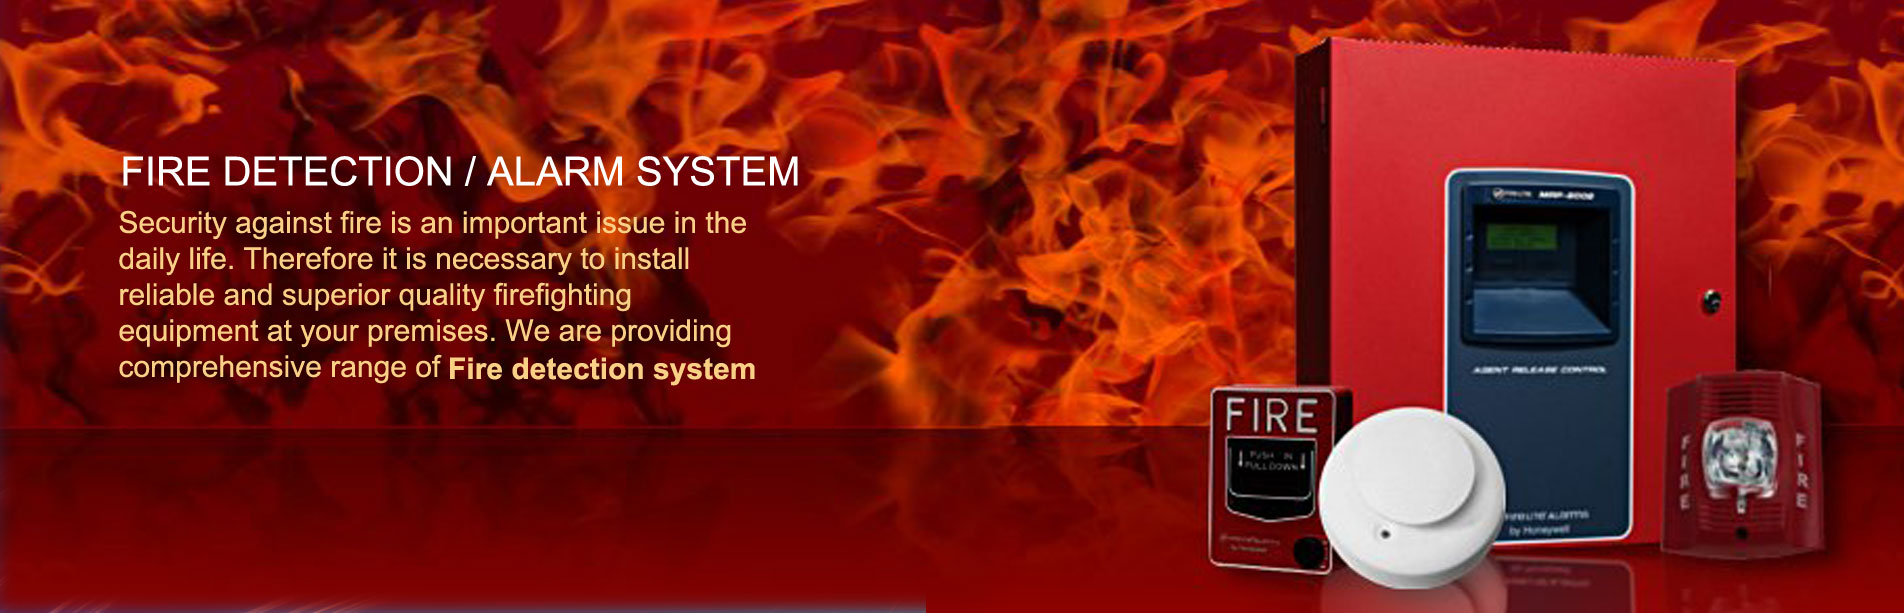 Fire Detection/Alarm Systems